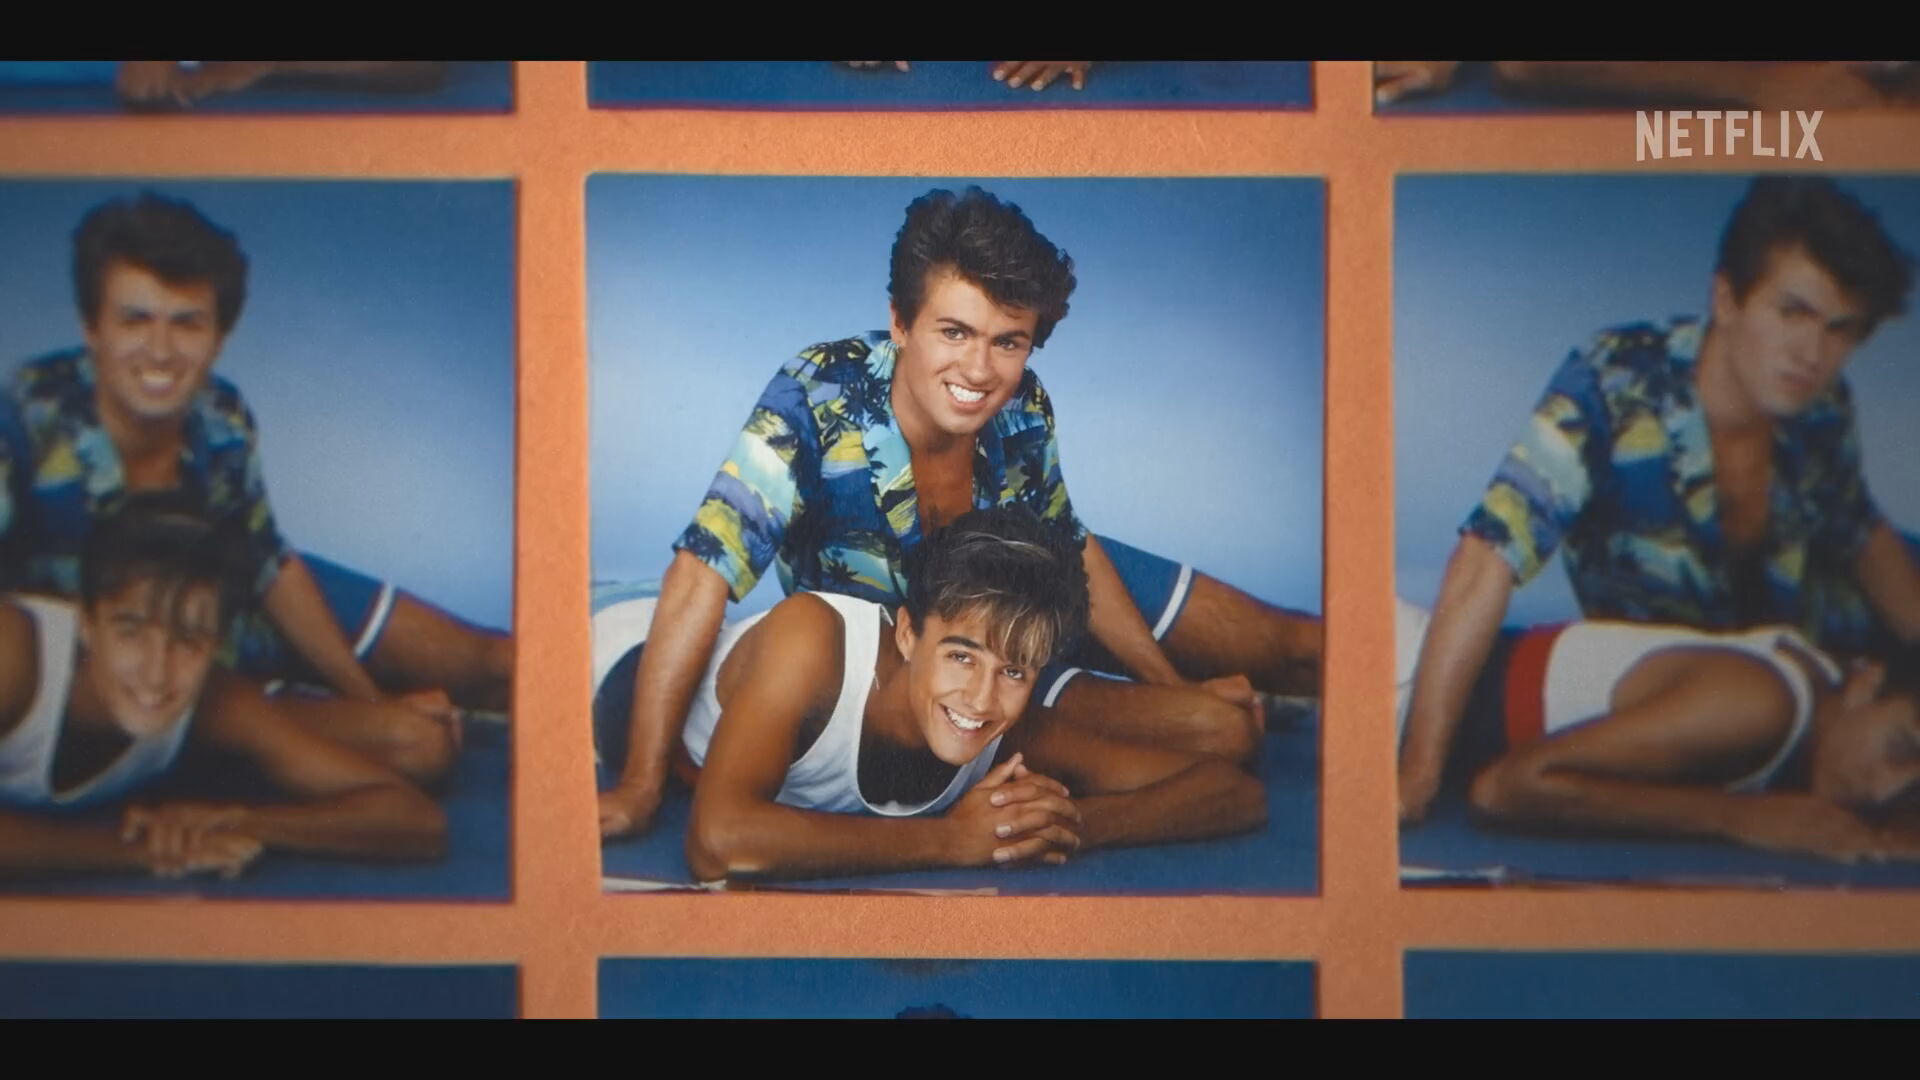 New documentary WHAM! explores the meteoric rise of the pop duo 